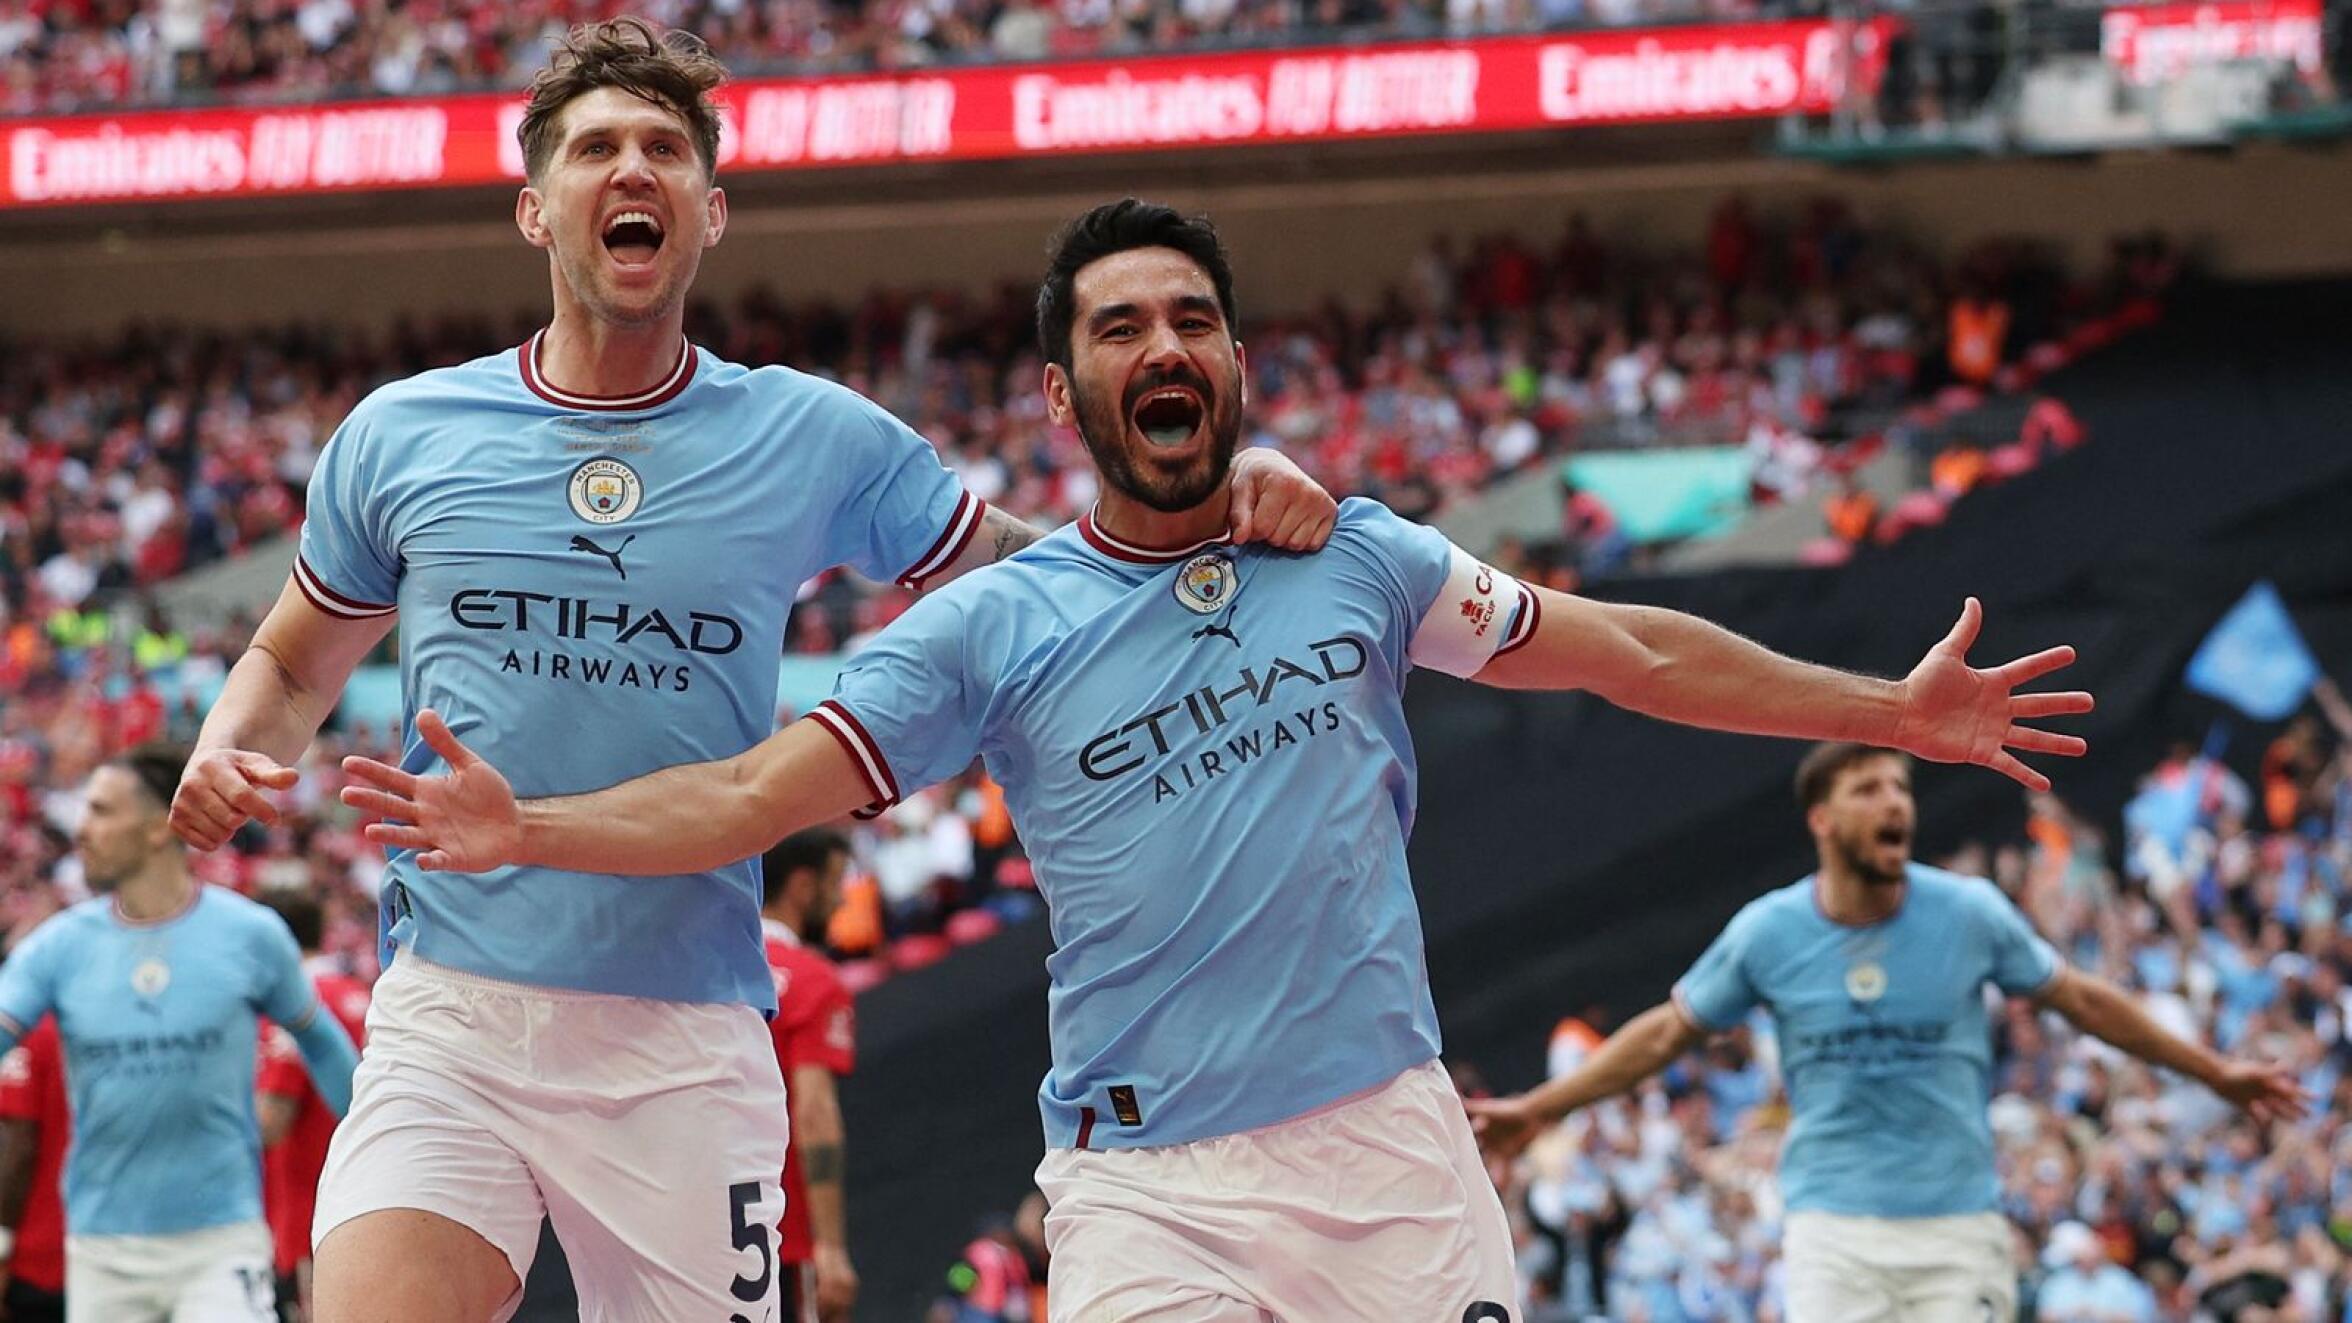 Manchester City's Ilkay Gundogan celebrates after scoring the second goal during their FA Cup final against Manchester United at Wembley Stadium in London on Saturday